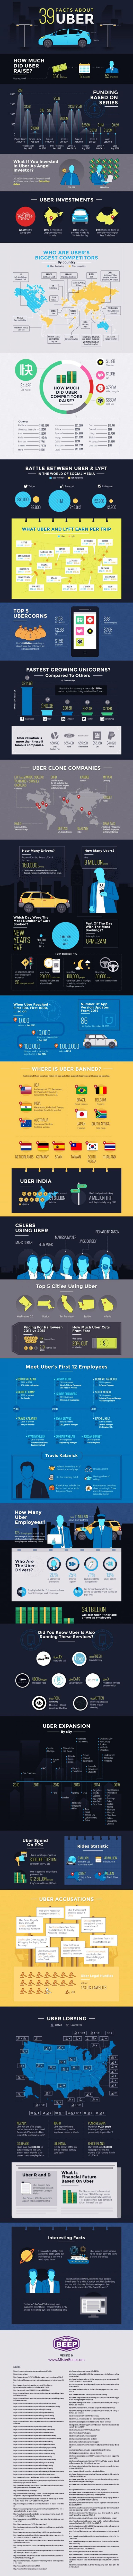 39 Facts About Uber Infographic